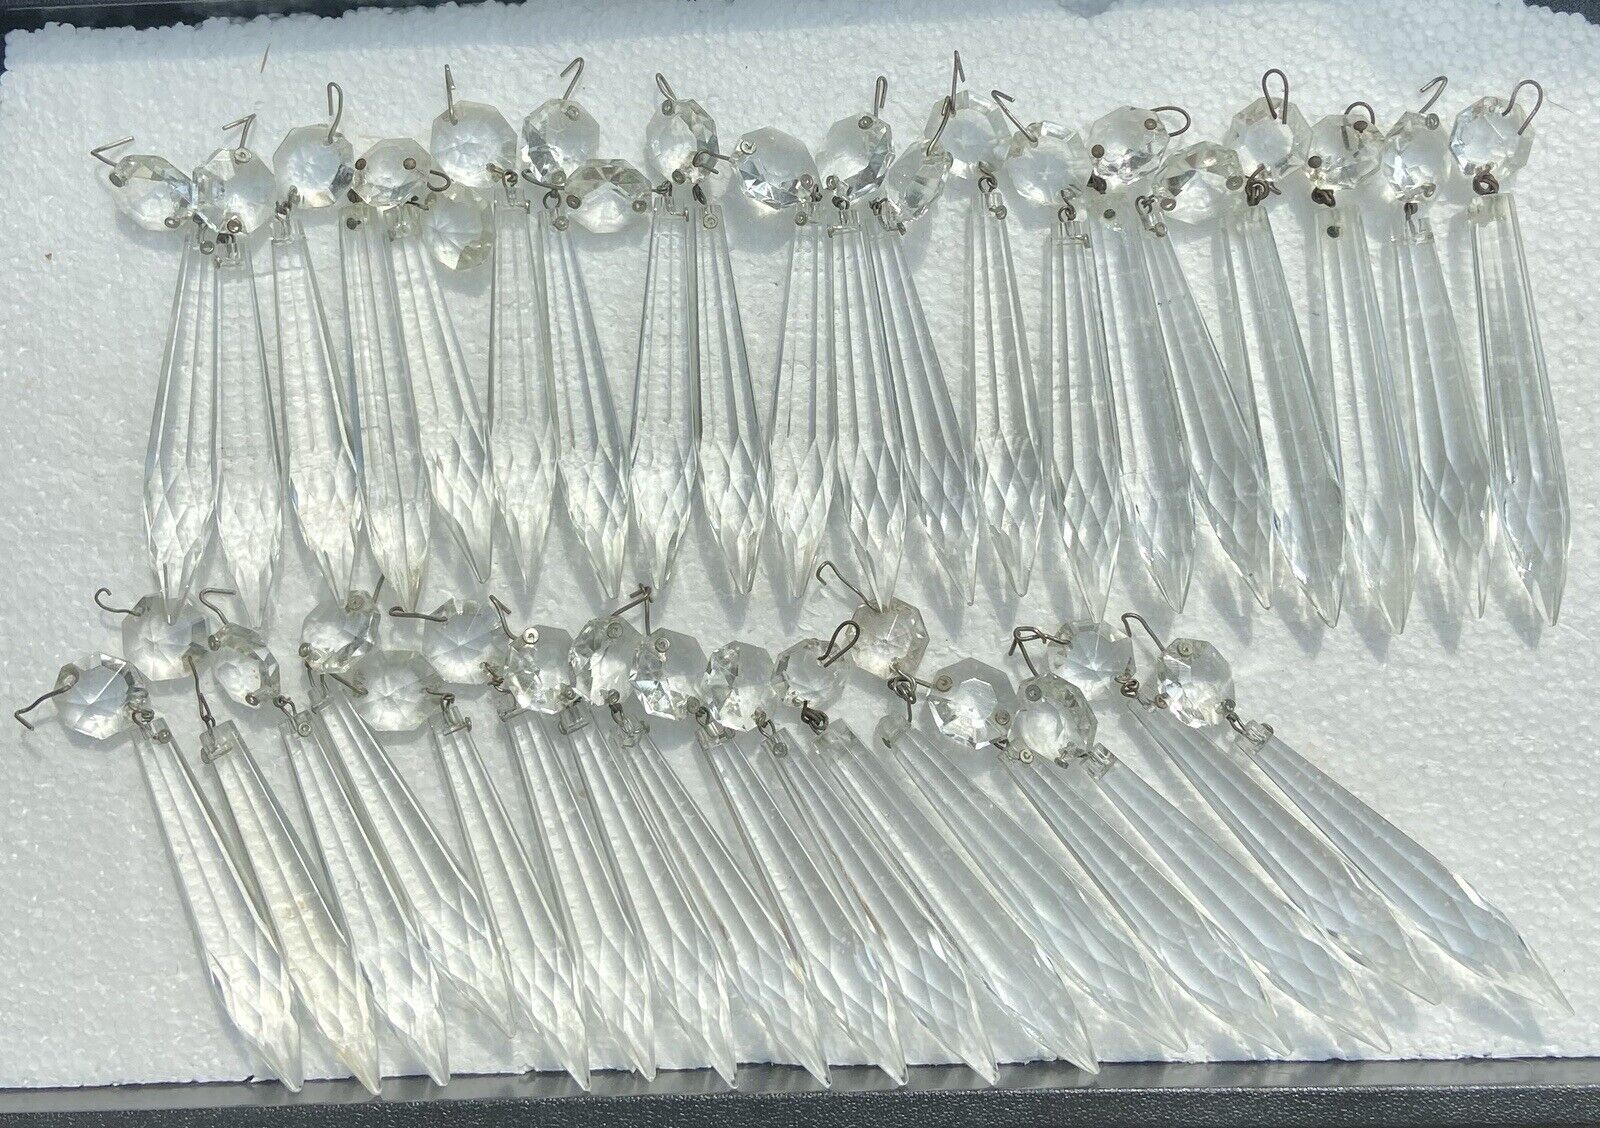 36 Vintage Prism Crystal Chandelier Drop Spear Icicle Glass Replacement 4”